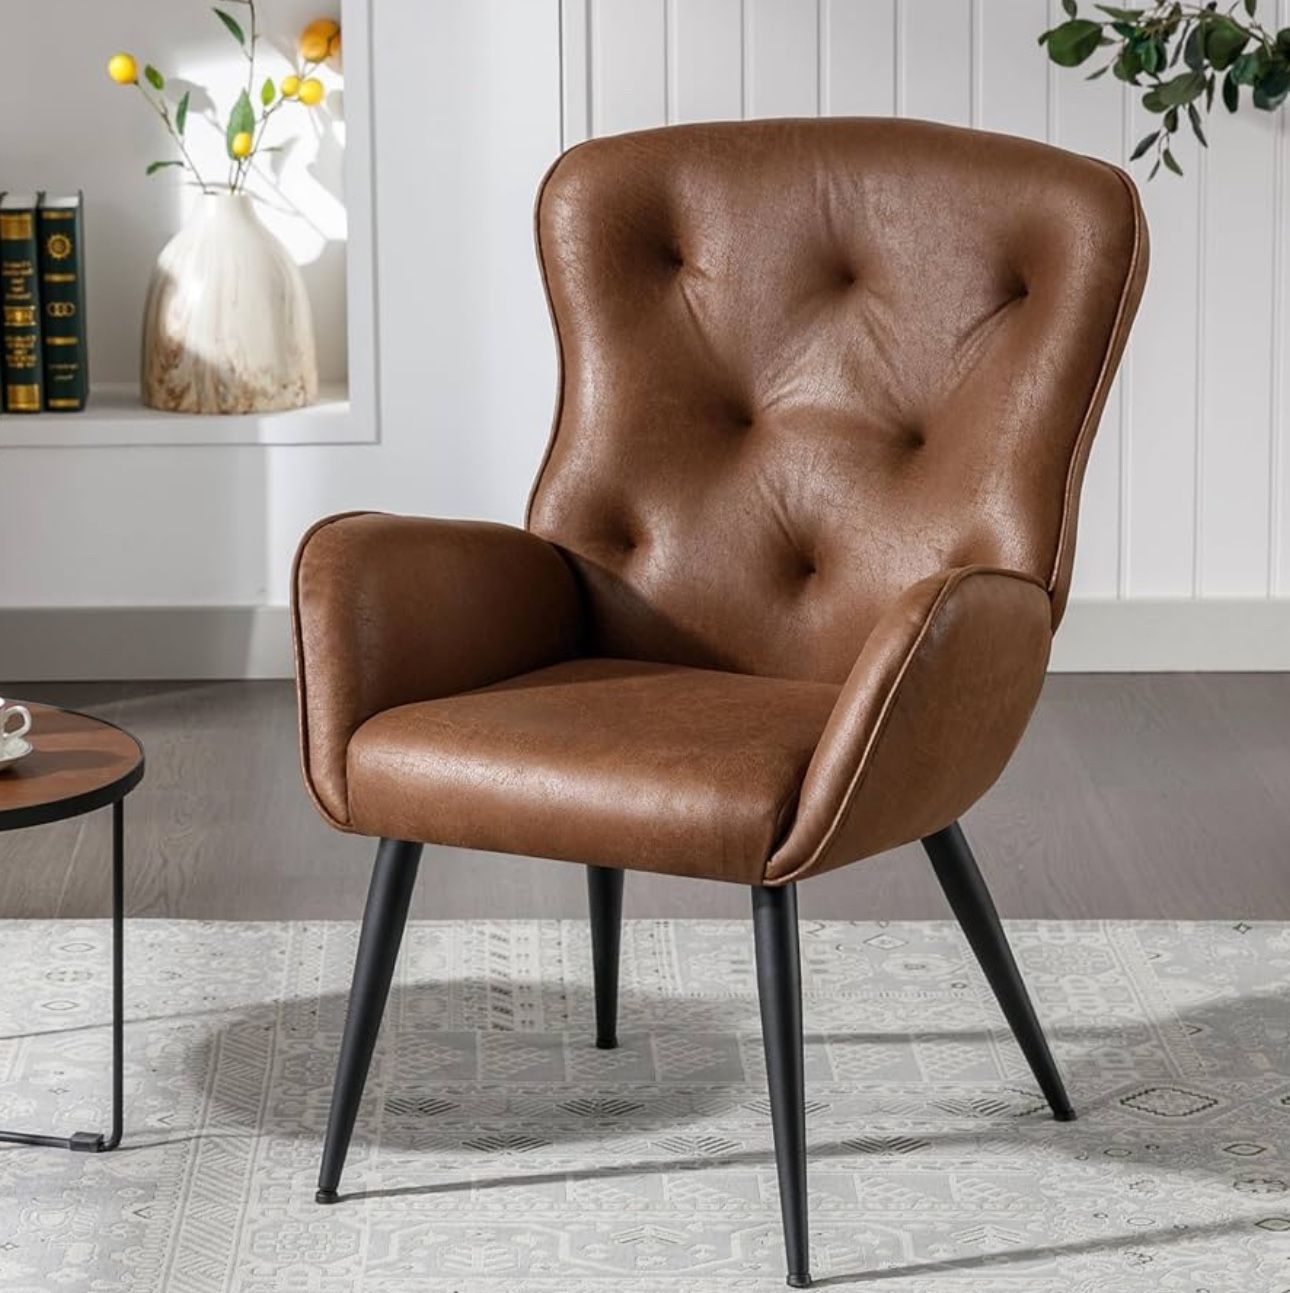 BFZ Faux Leather Accent Chair with High Back Design, Armchair with Metal Legs in Modern Style, Comfy Upholstered Wingback Chair for Living Room, Bedro